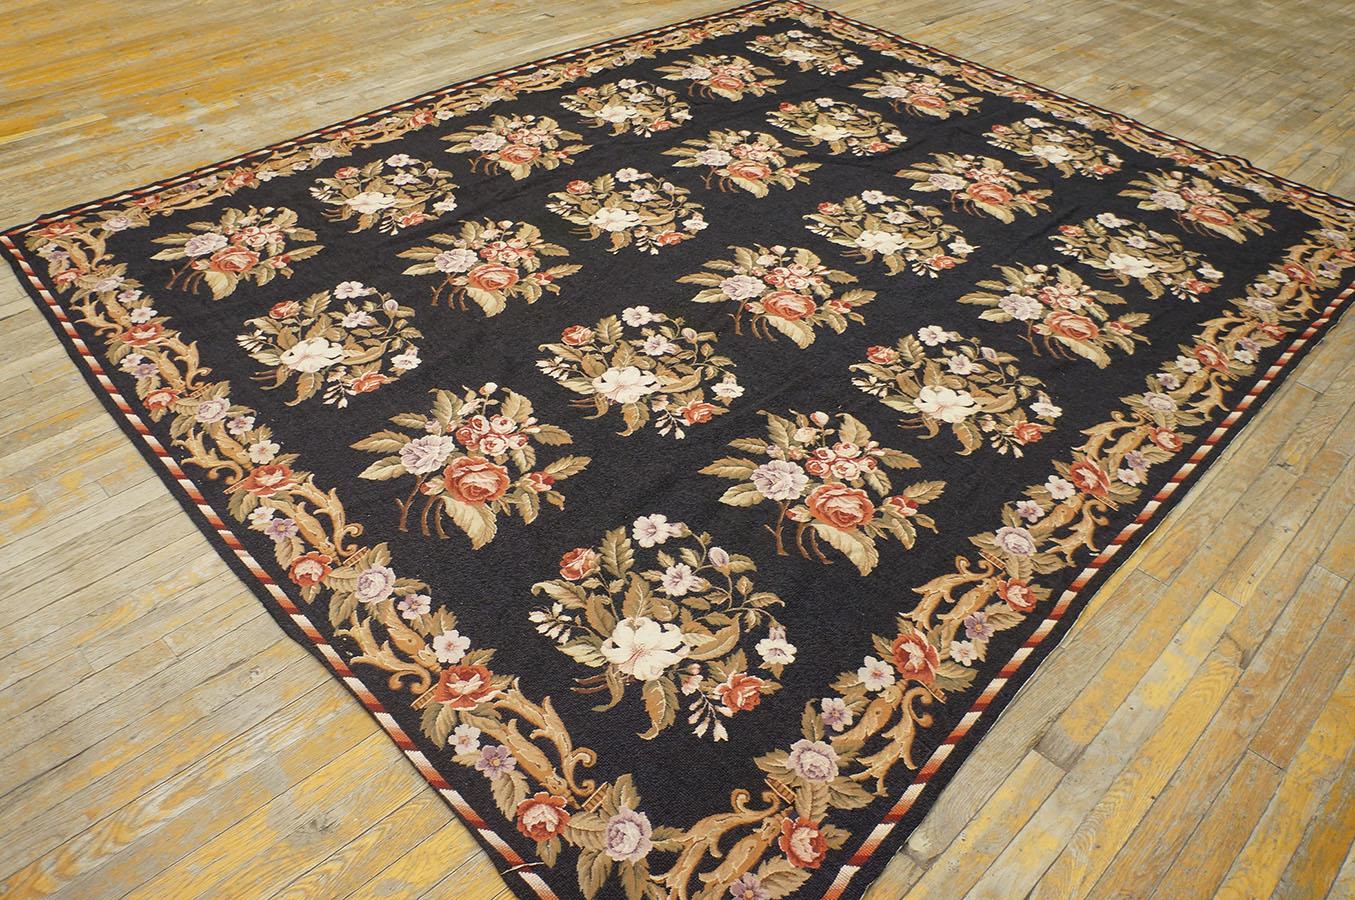 French Provincial 1980s Vintage Needlepoint Carpet ( 7'10'' x 9'6''- 240 x 290 ) For Sale